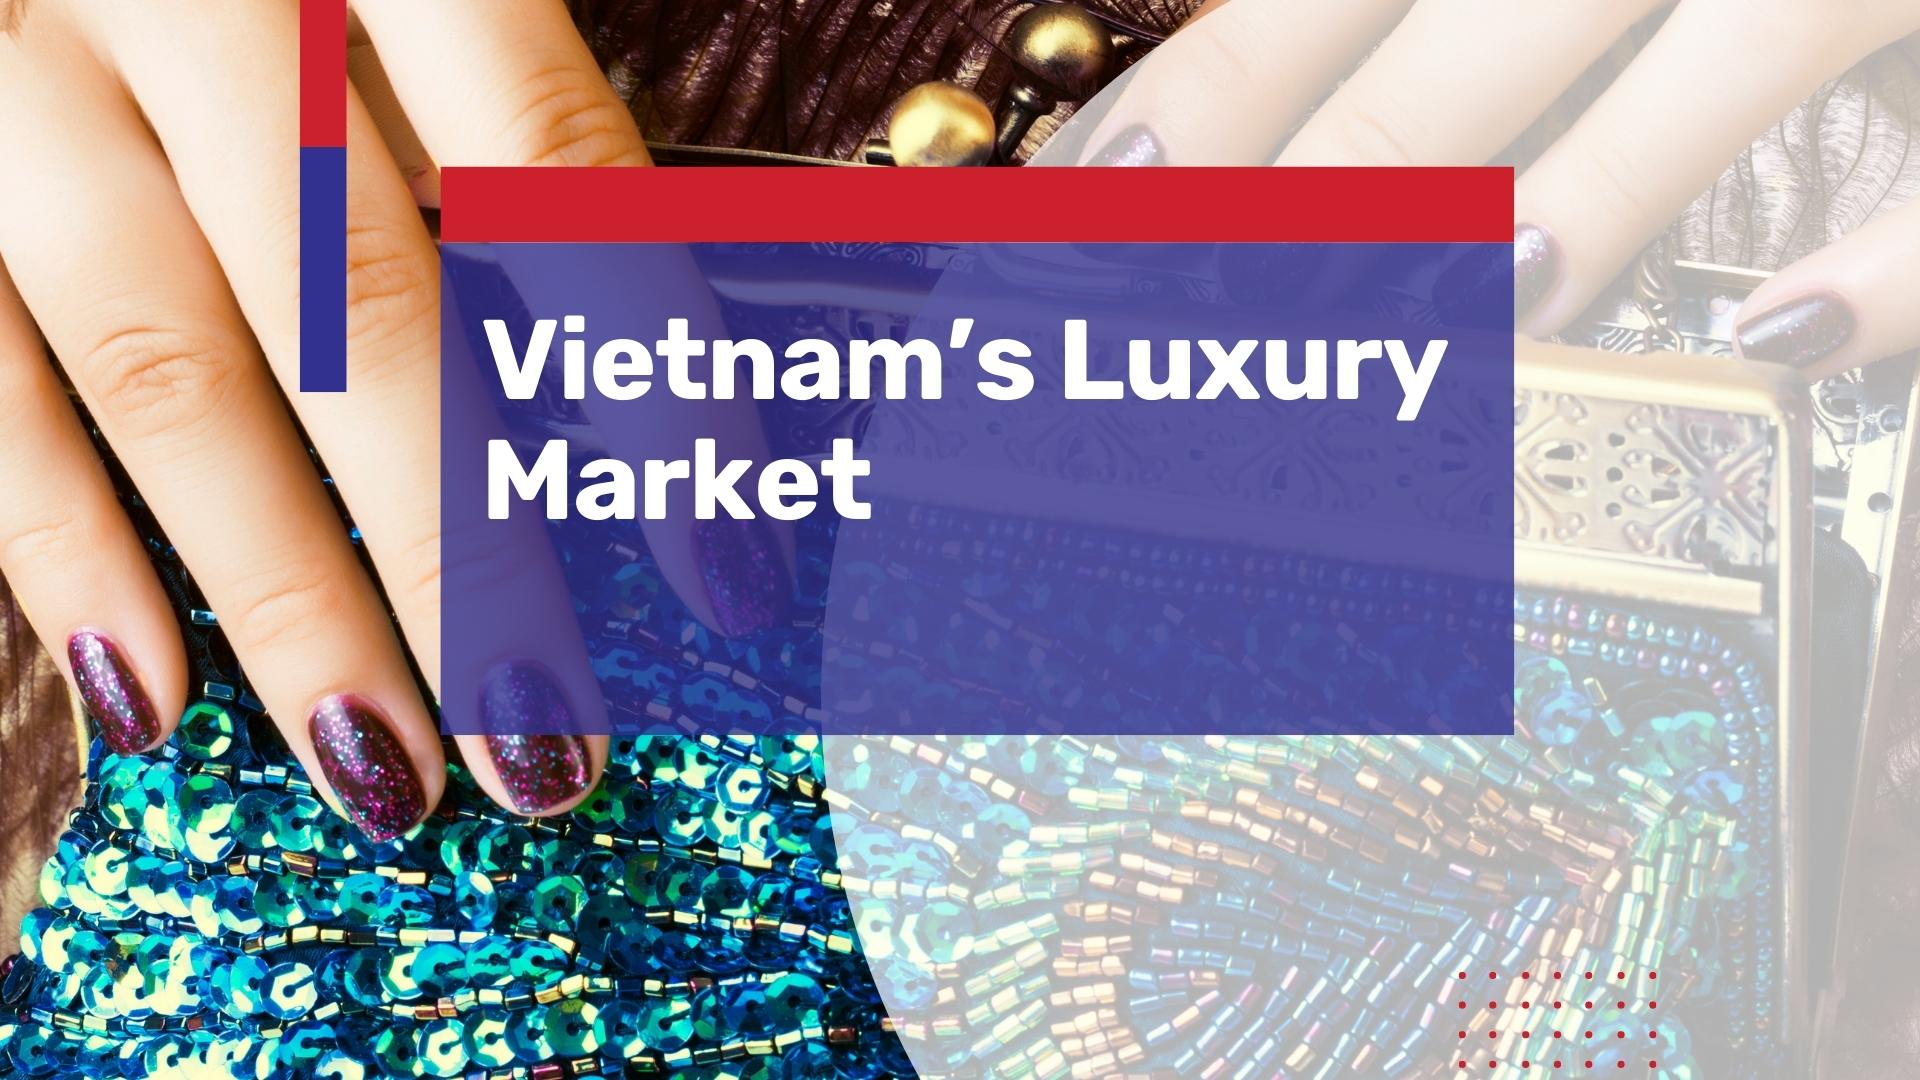 Vietnam is Asia’s fastest-growing market for luxury goods